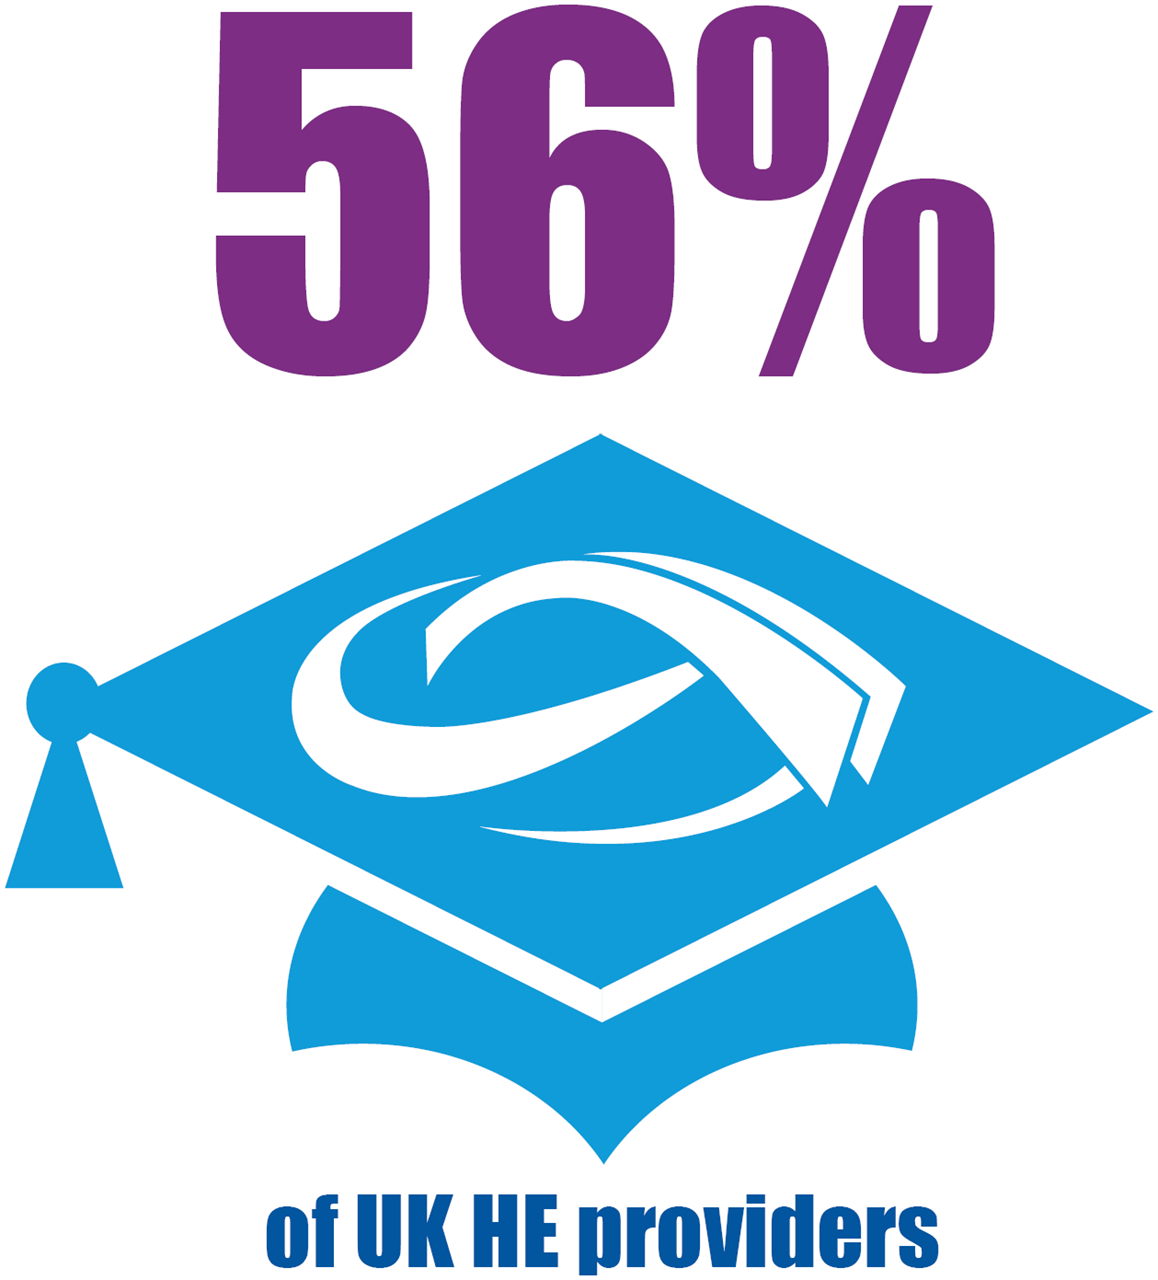 56% of UK HE providers are AMOSSHE members